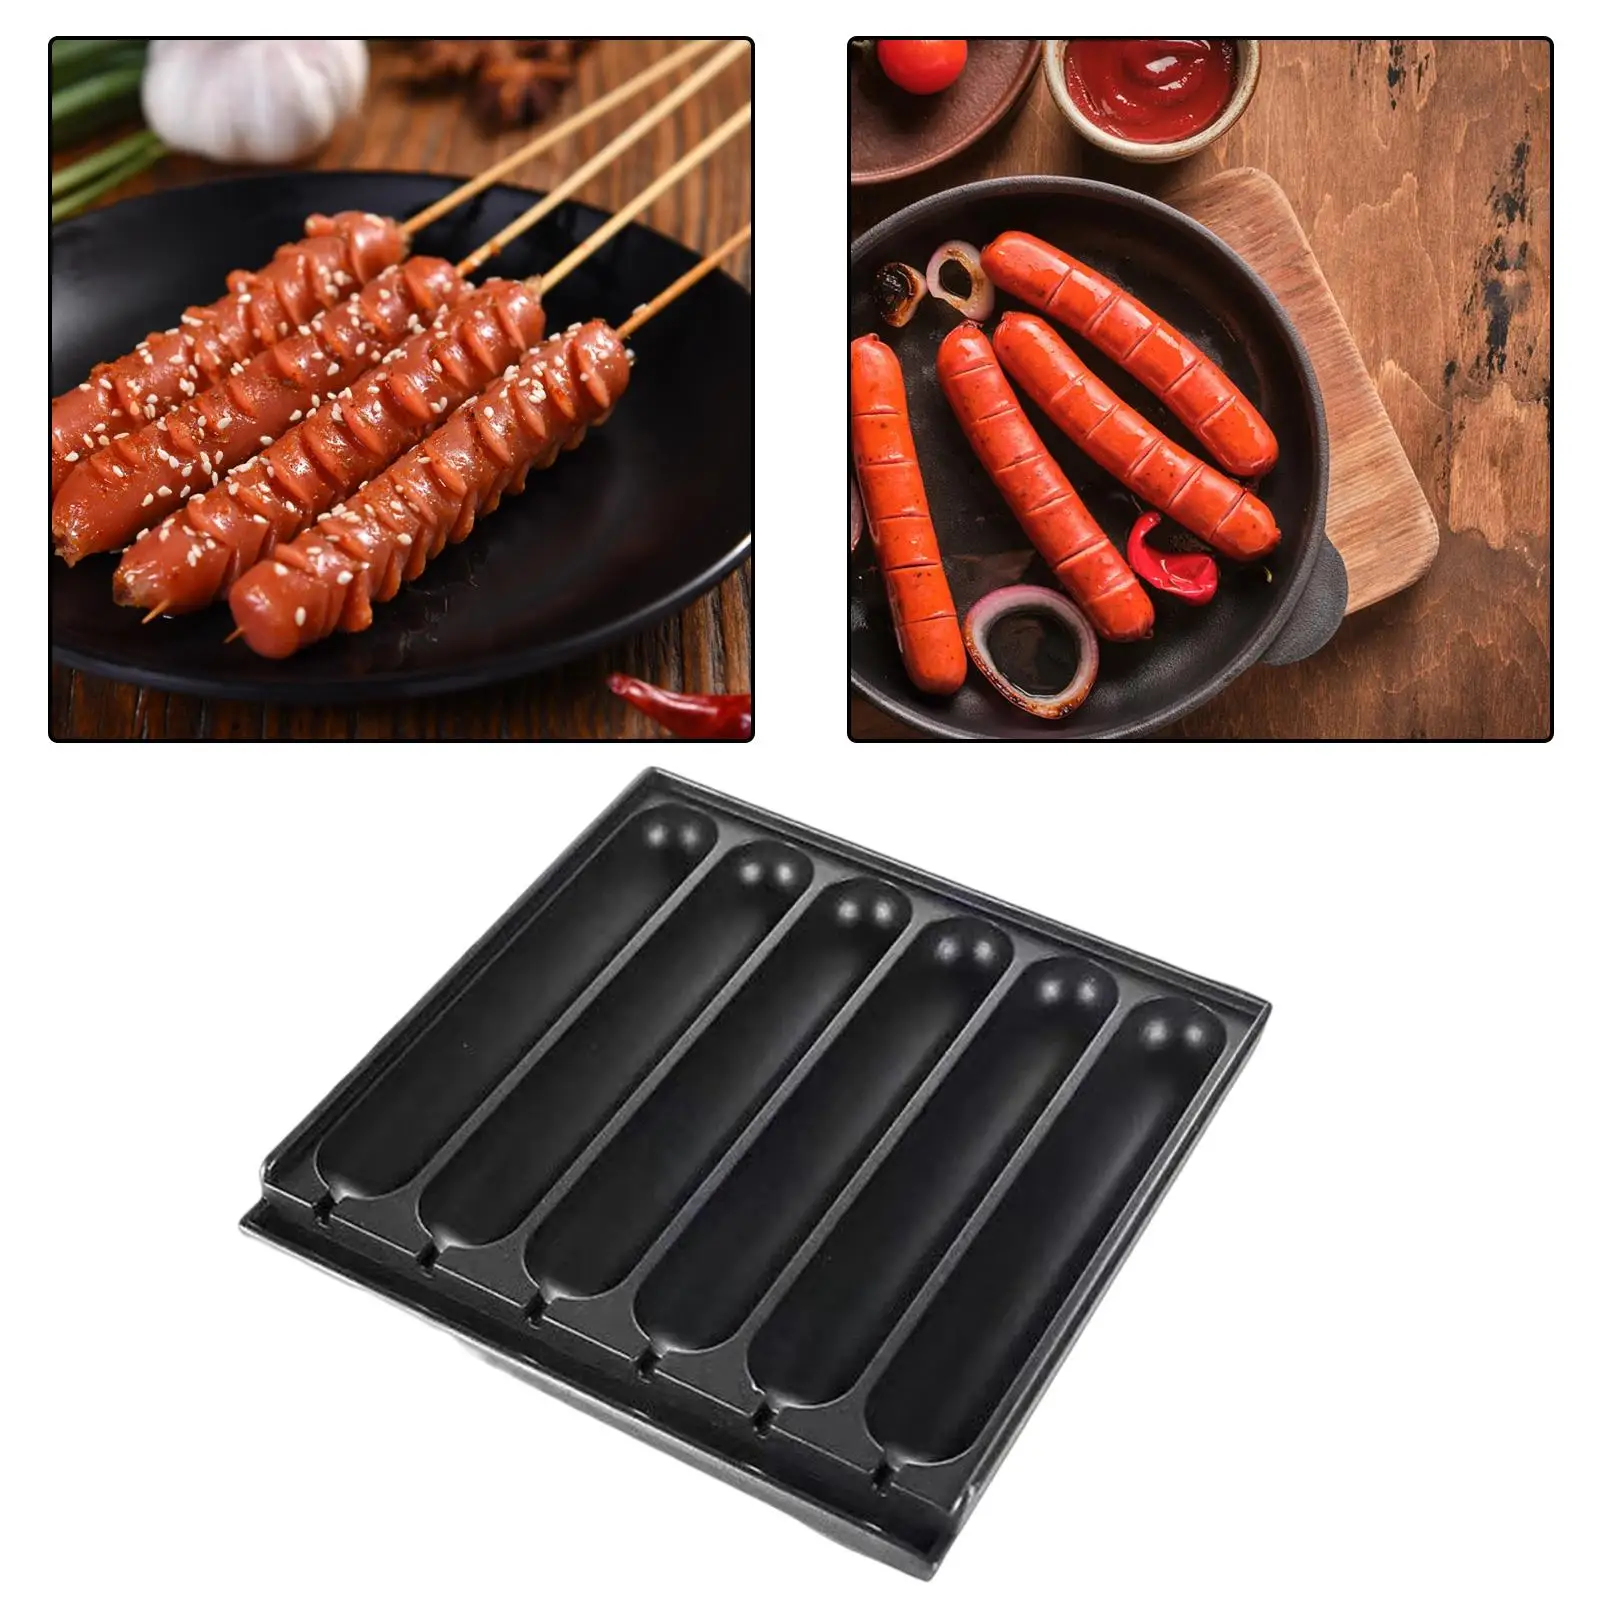 Sausage Grilling Pan Corn maker, 6 Cavity, Aluminum Alloy Hot maker Grill Pan for Cooking, Kitchen